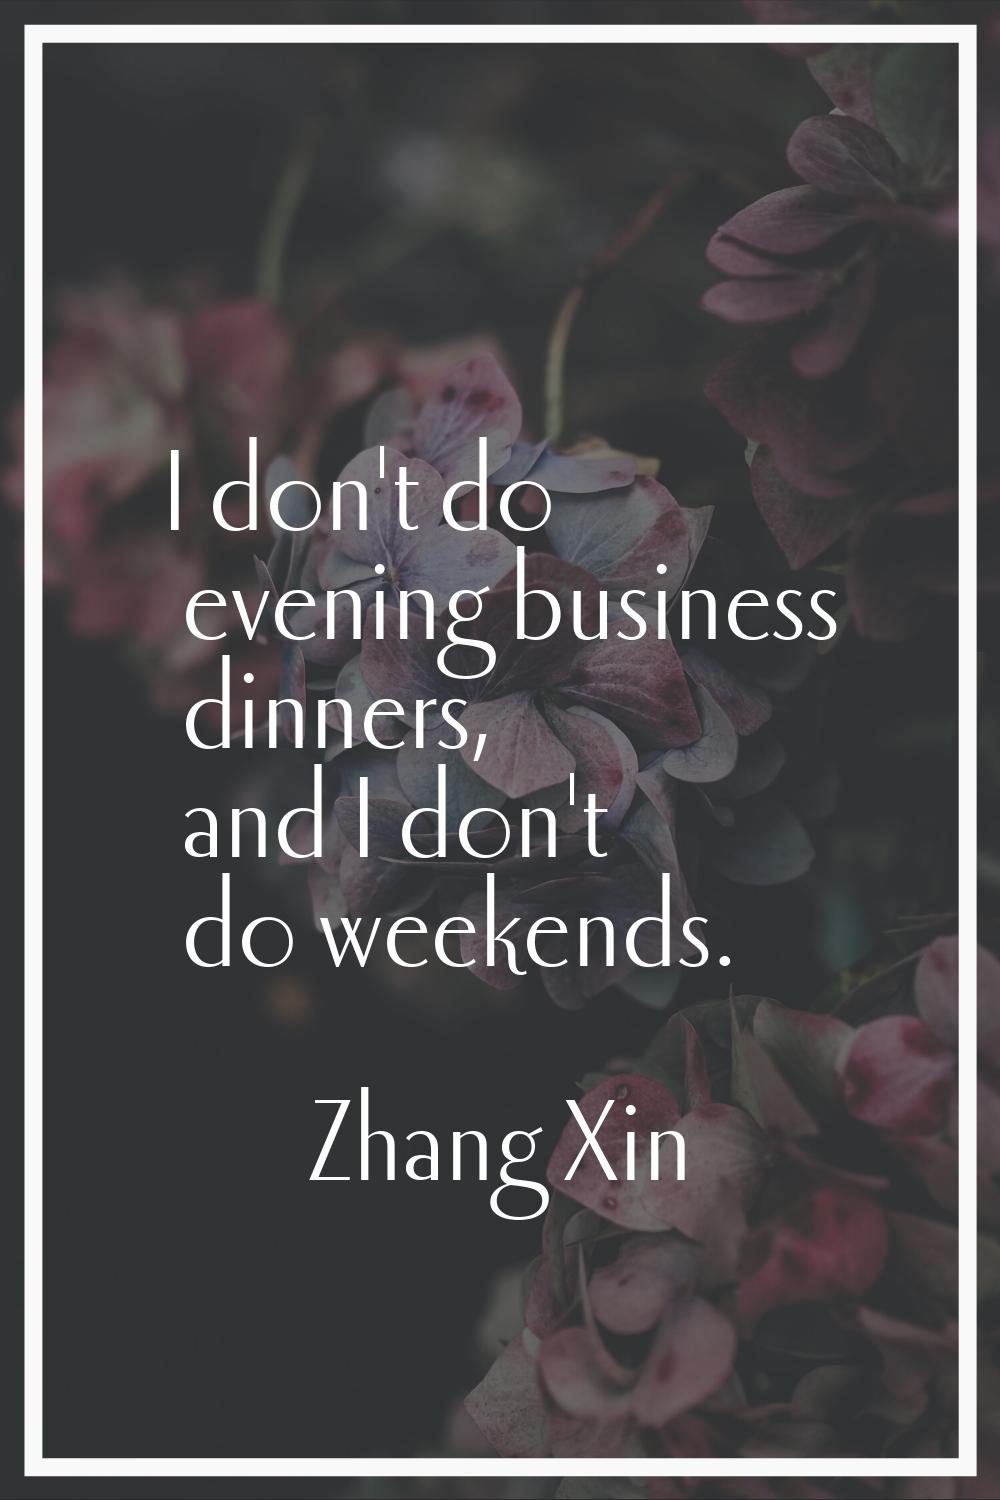 I don't do evening business dinners, and I don't do weekends.